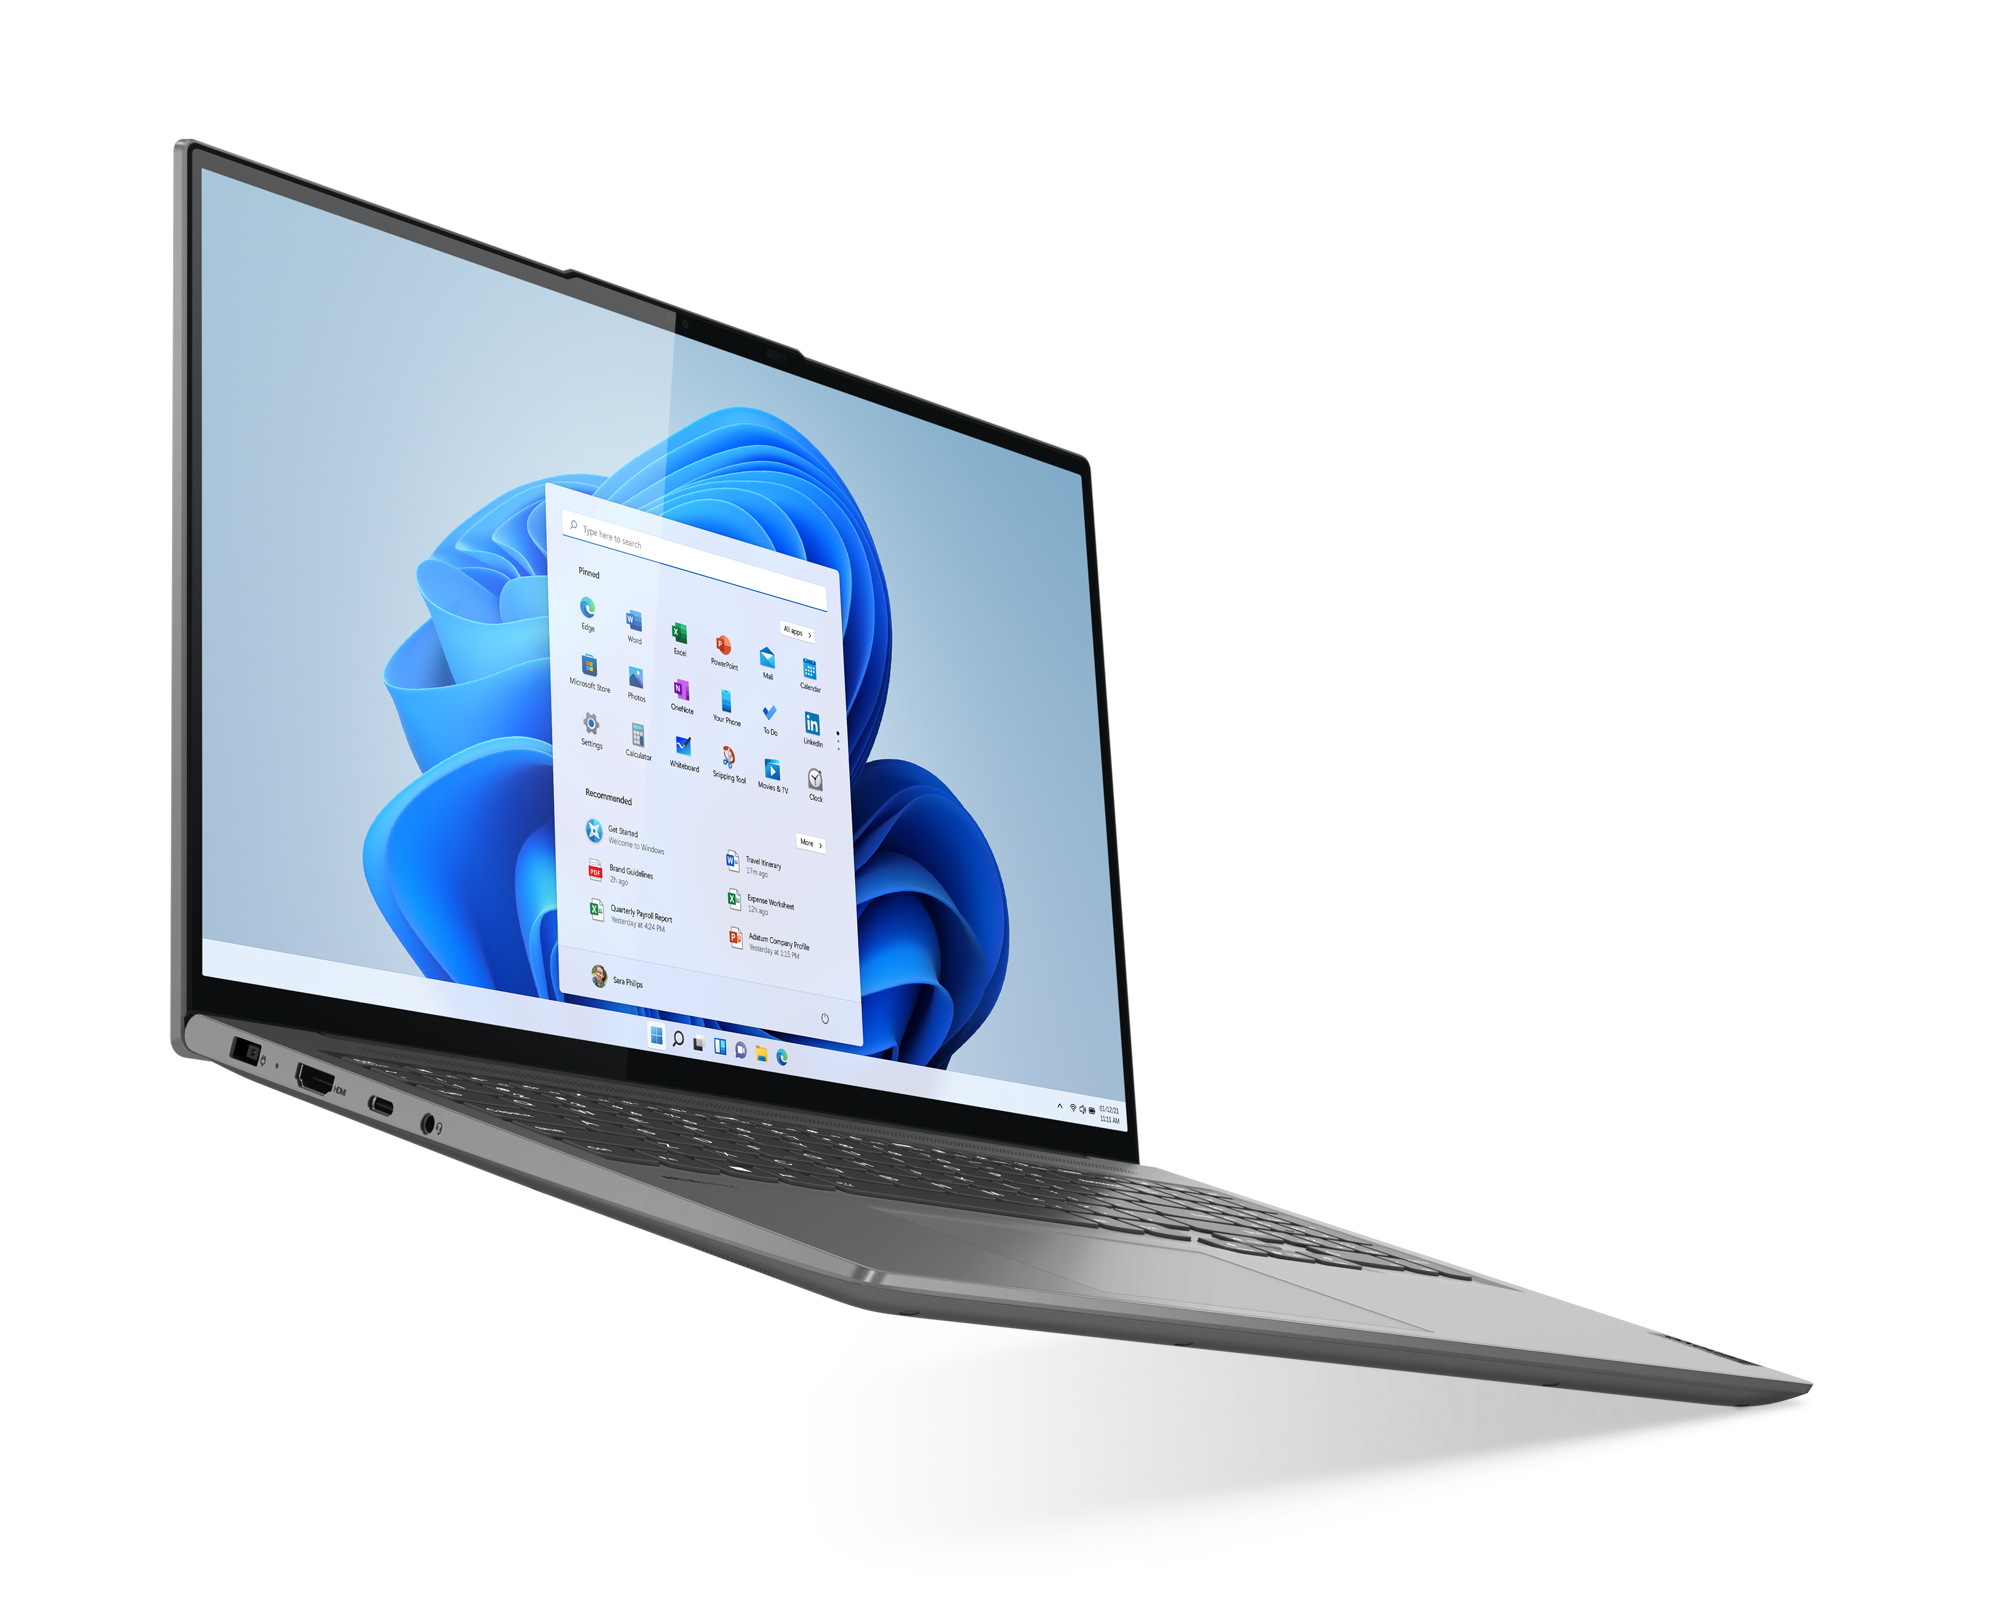 Lenovo Yoga Slim 7i Pro: 16-inch model revealed with an Intel Arc A370M, a   and 120 Hz display, plus a number pad  News